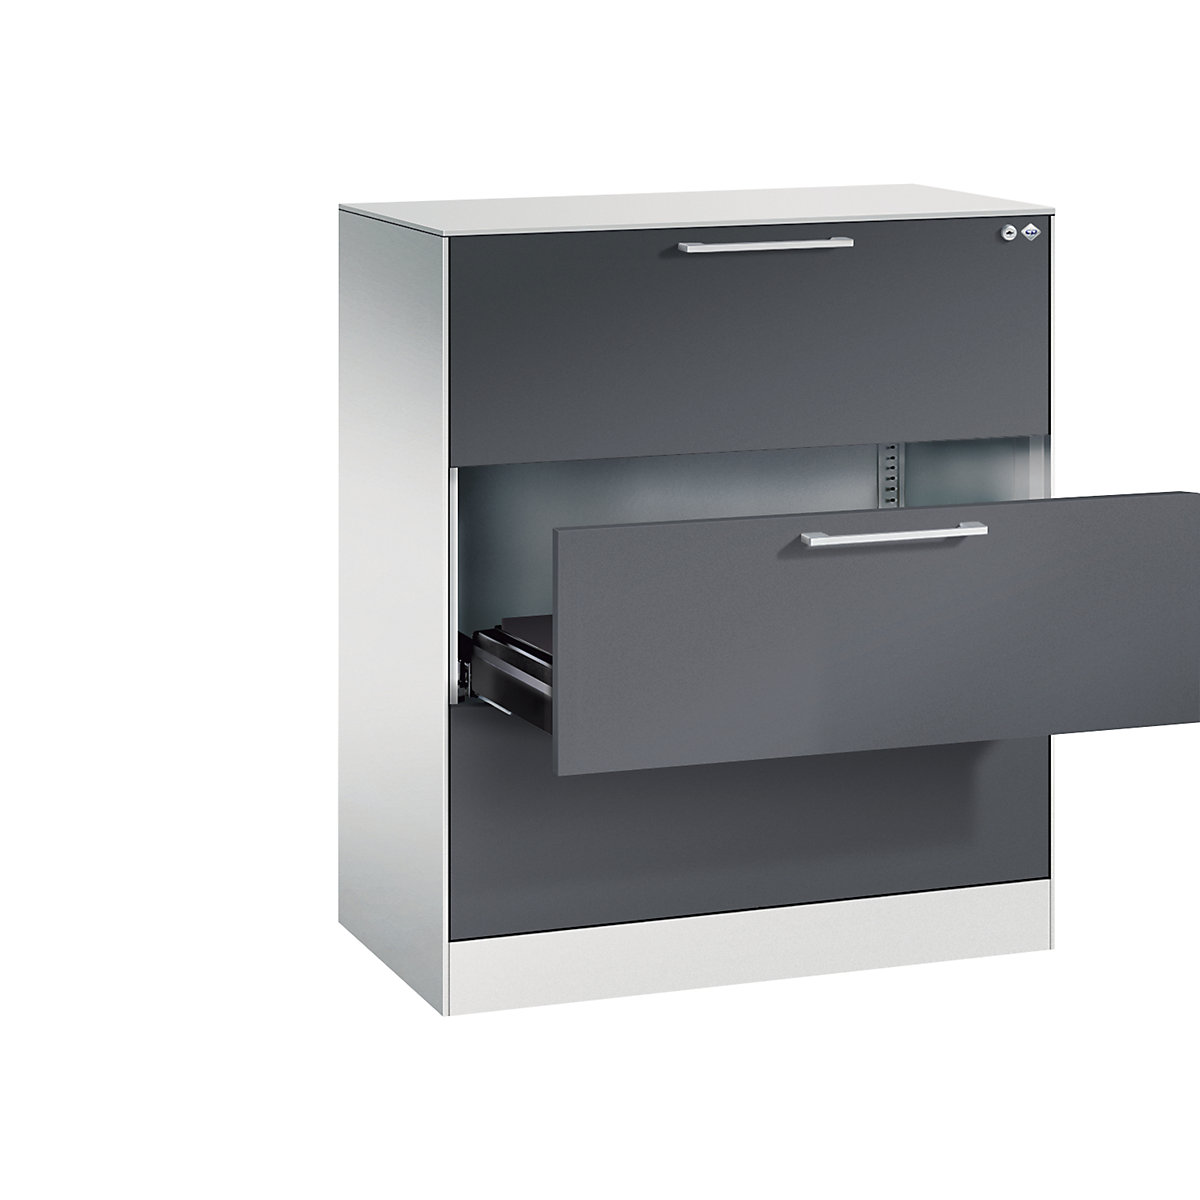 ASISTO card file cabinet – C+P, height 992 mm, with 3 drawers, A4 landscape, light grey/black grey-20